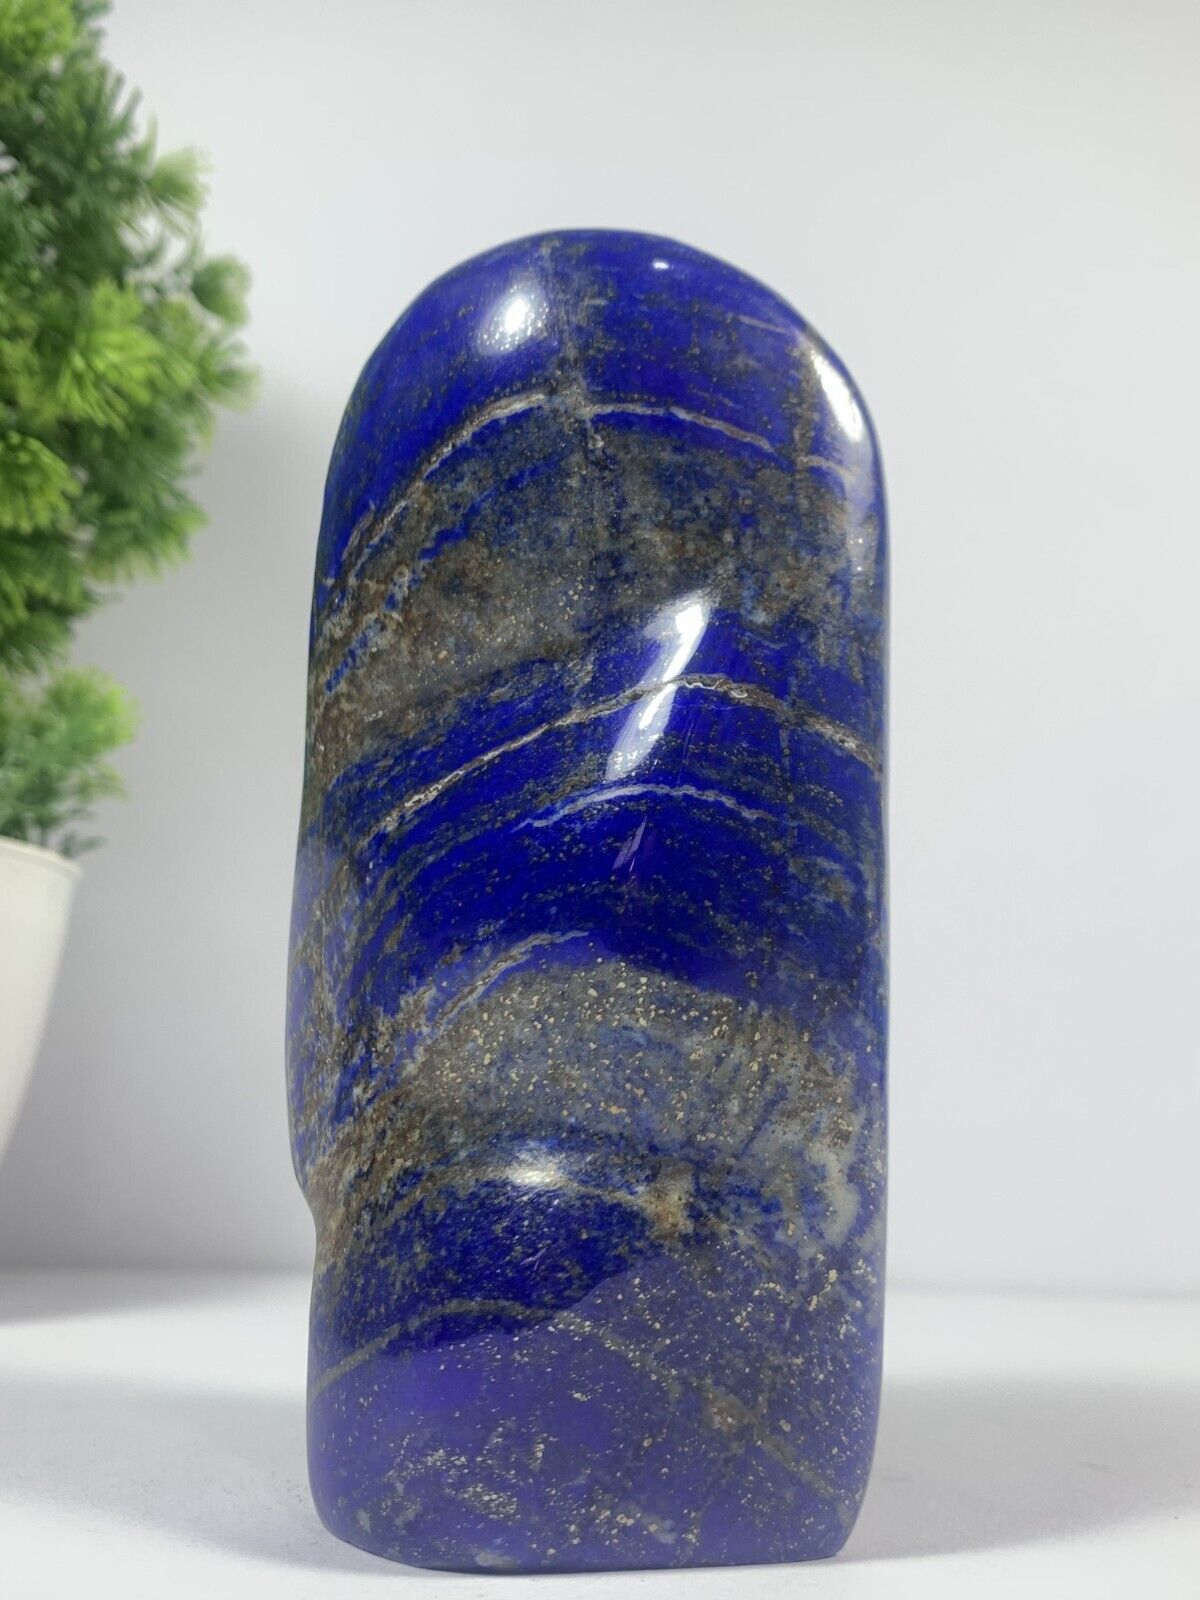 530  Gram A+++ Natural Beautiful Polished Freeform Lapis Lazuli From Afghanistan